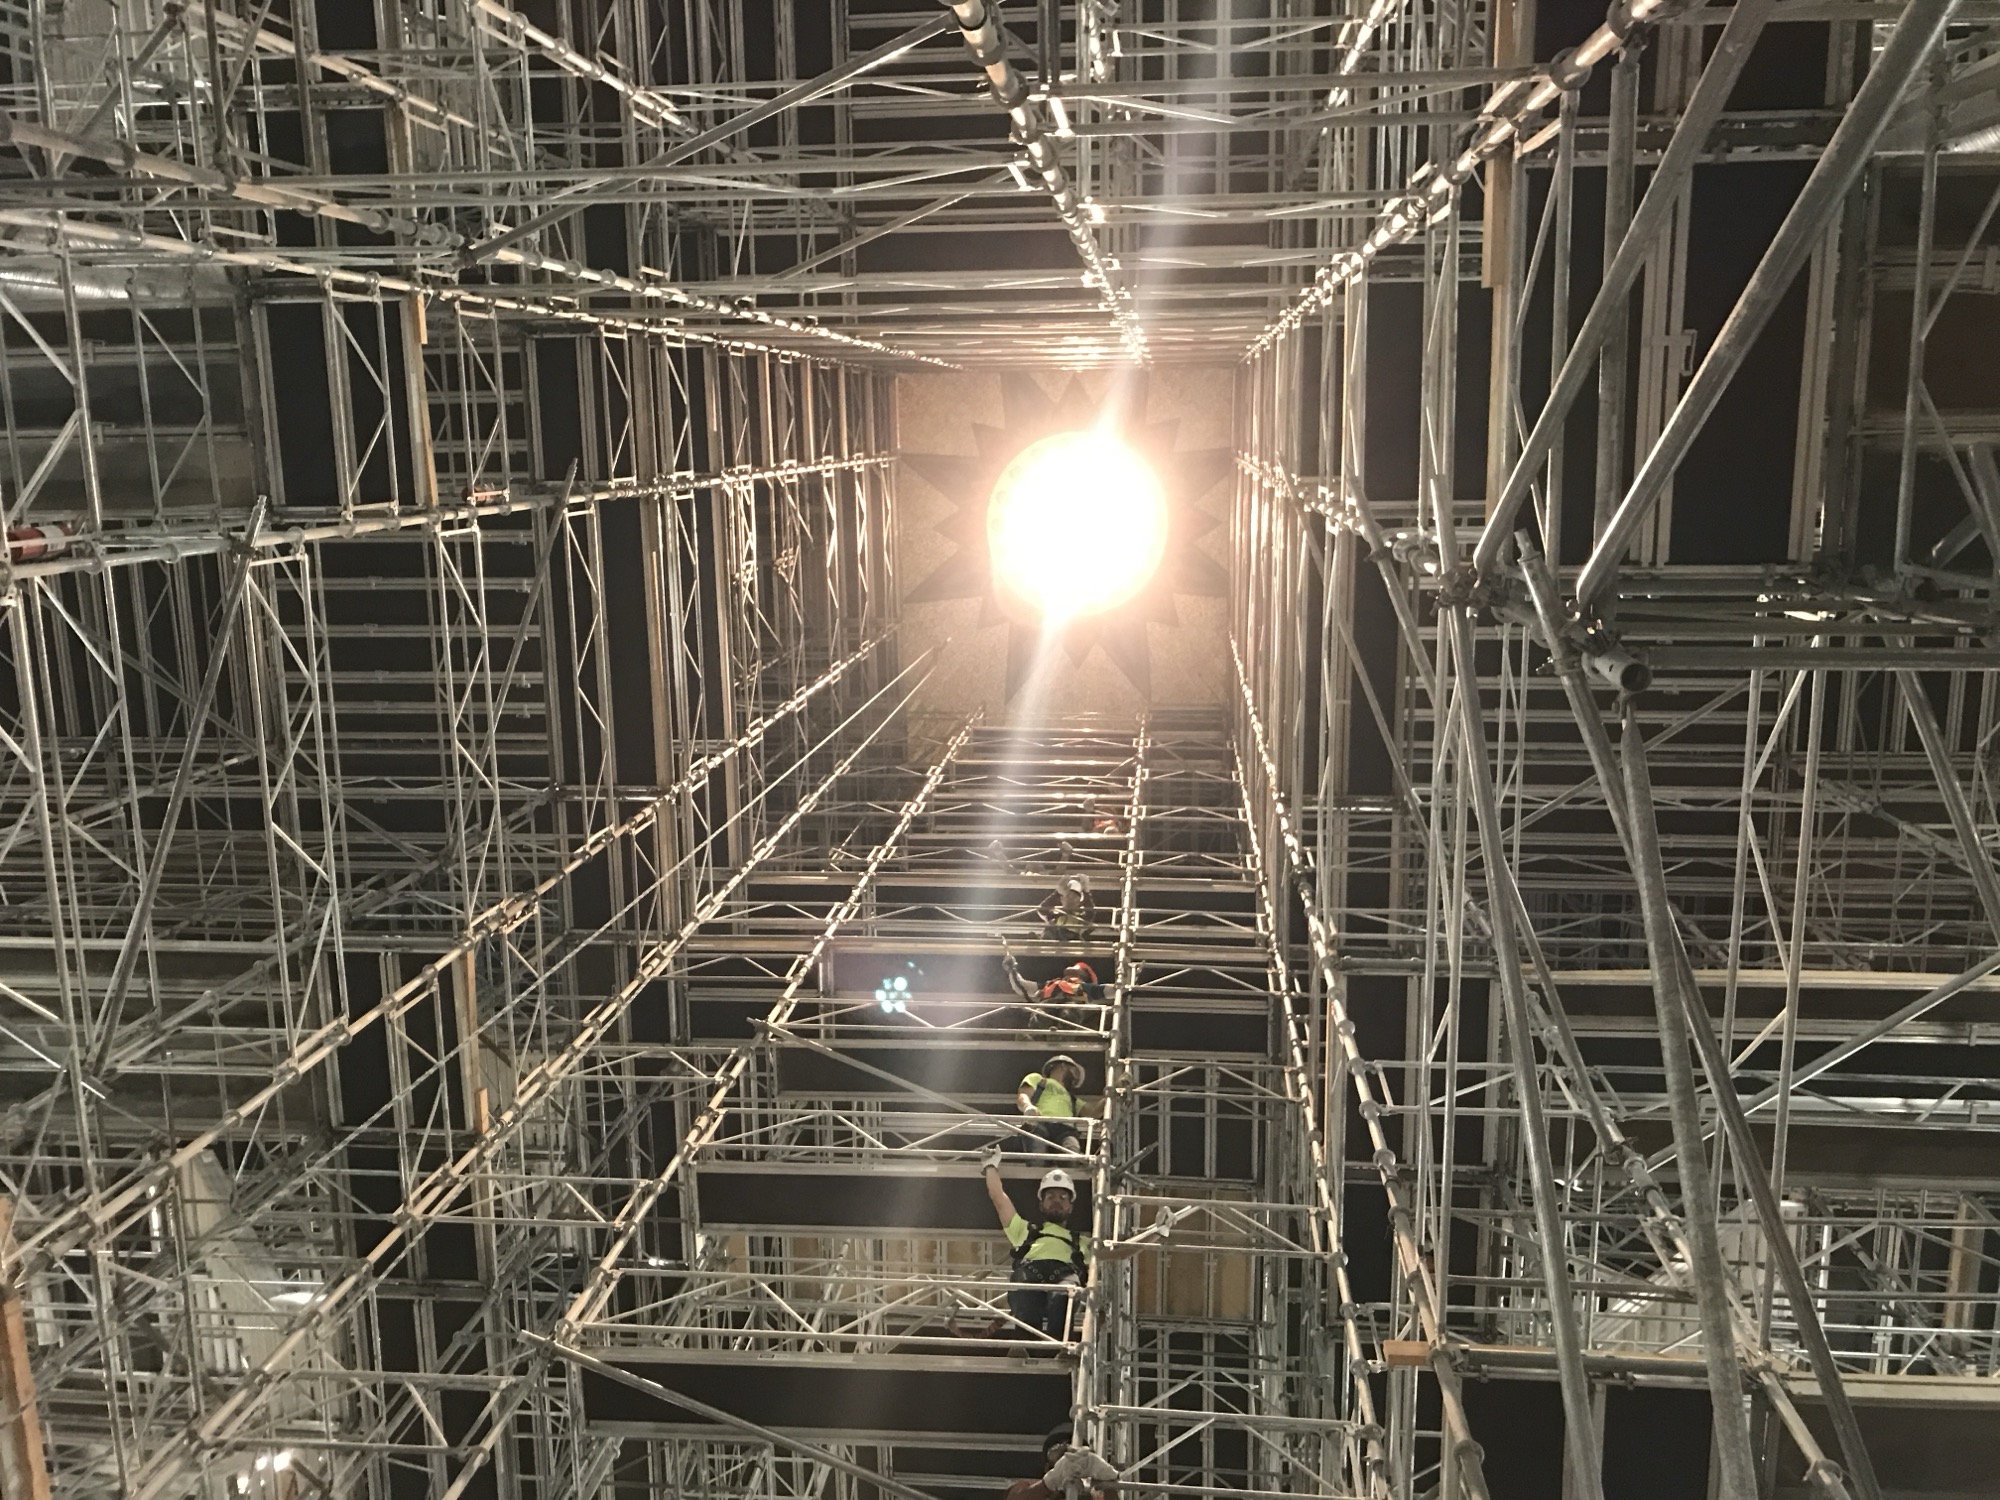 After the structure was inspected for scaffolding safety, workers begin their day with a burst of sunshine through the dome's oculus.